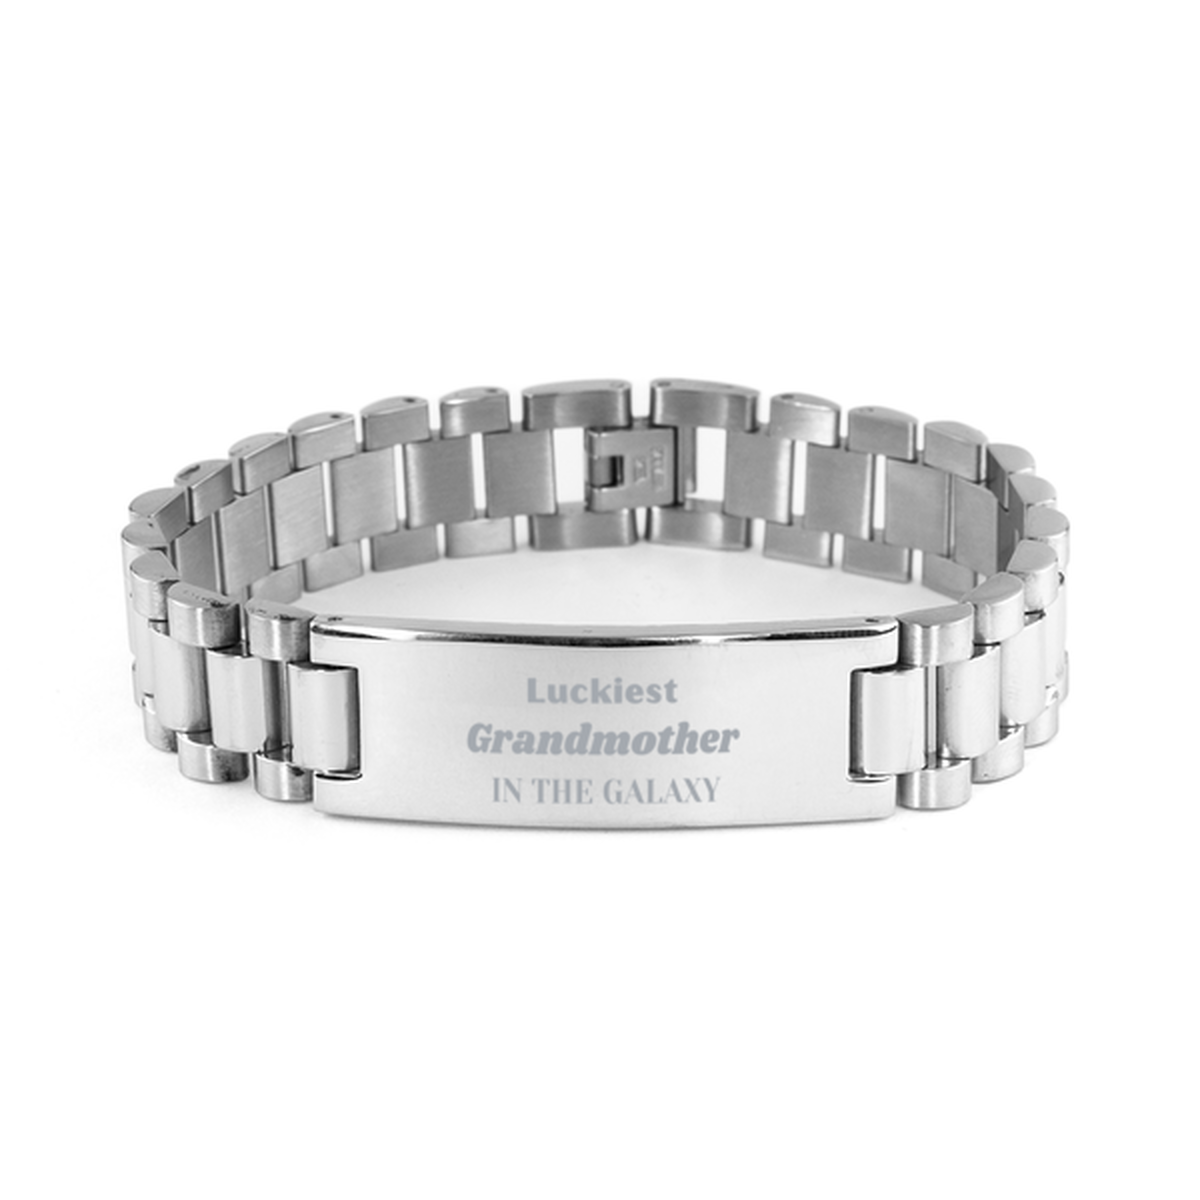 Luckiest Grandmother in the Galaxy, To My Grandmother Engraved Gifts, Christmas Grandmother Ladder Stainless Steel Bracelet Gifts, X-mas Birthday Unique Gifts For Grandmother Men Women